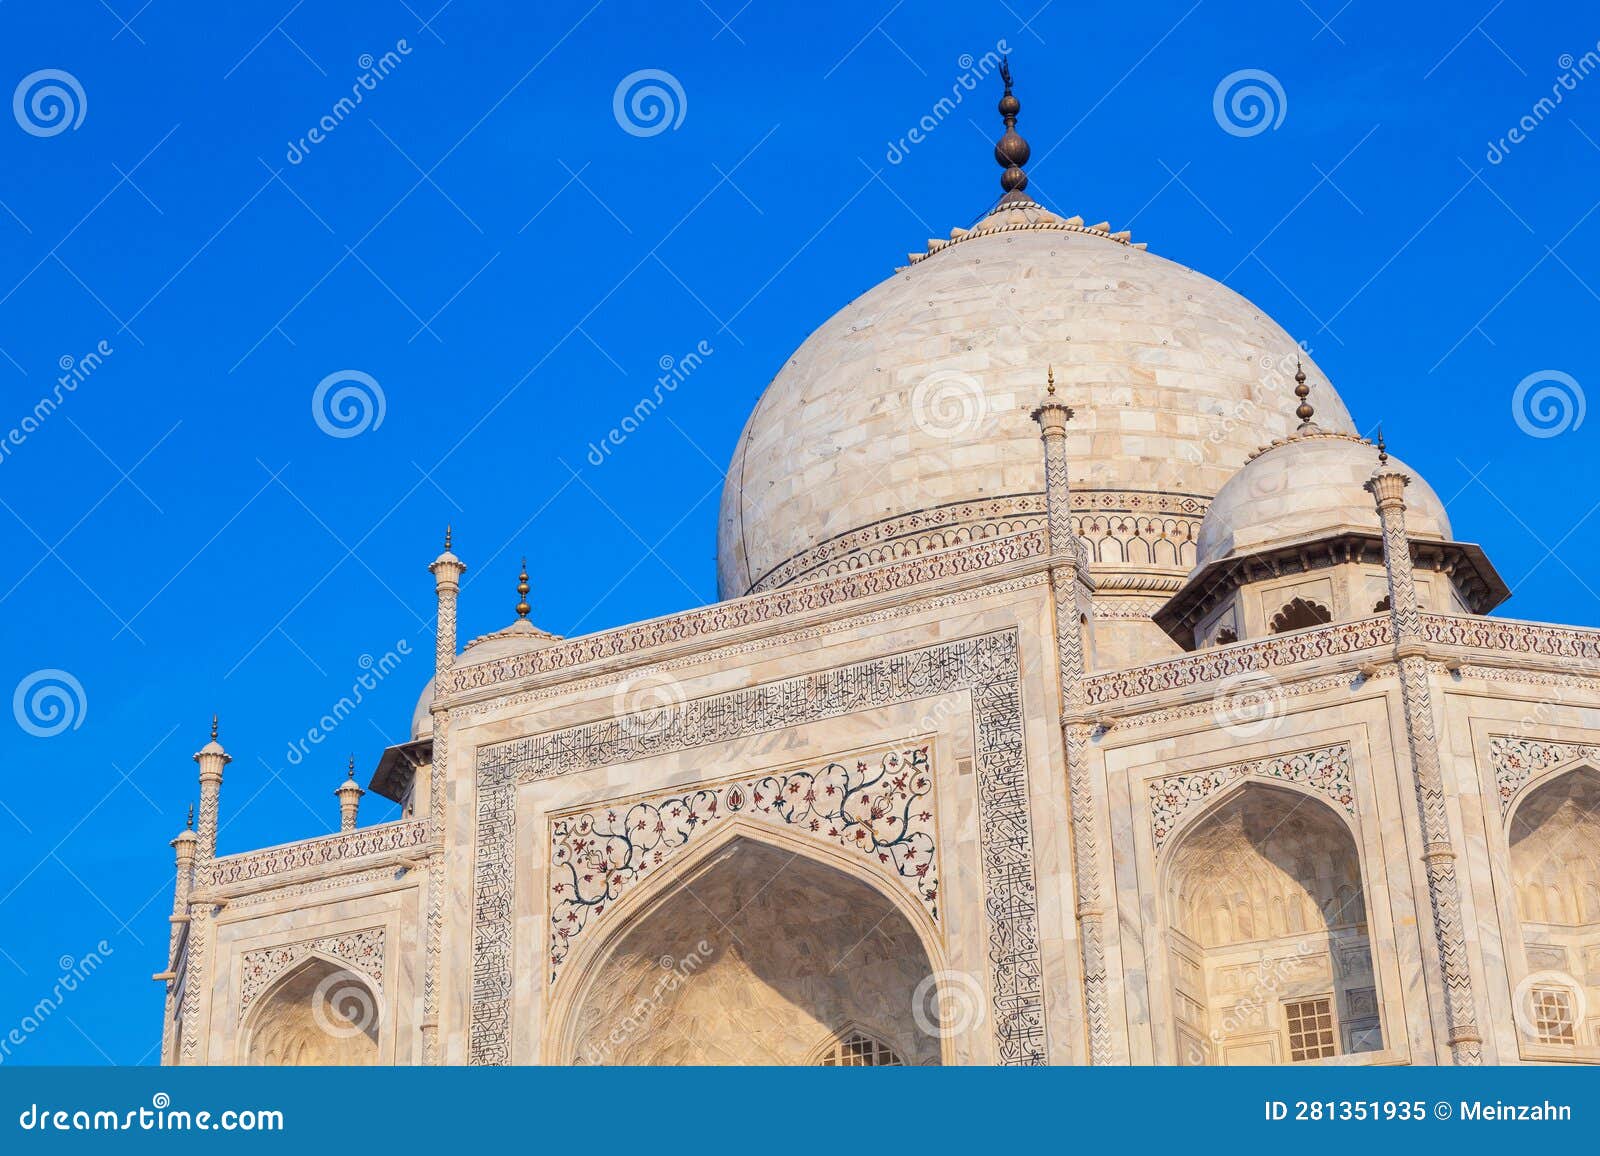 taj mahal in india under blue sky with the inscription of the coran in arabic letter meaning in english: this is an invitation to